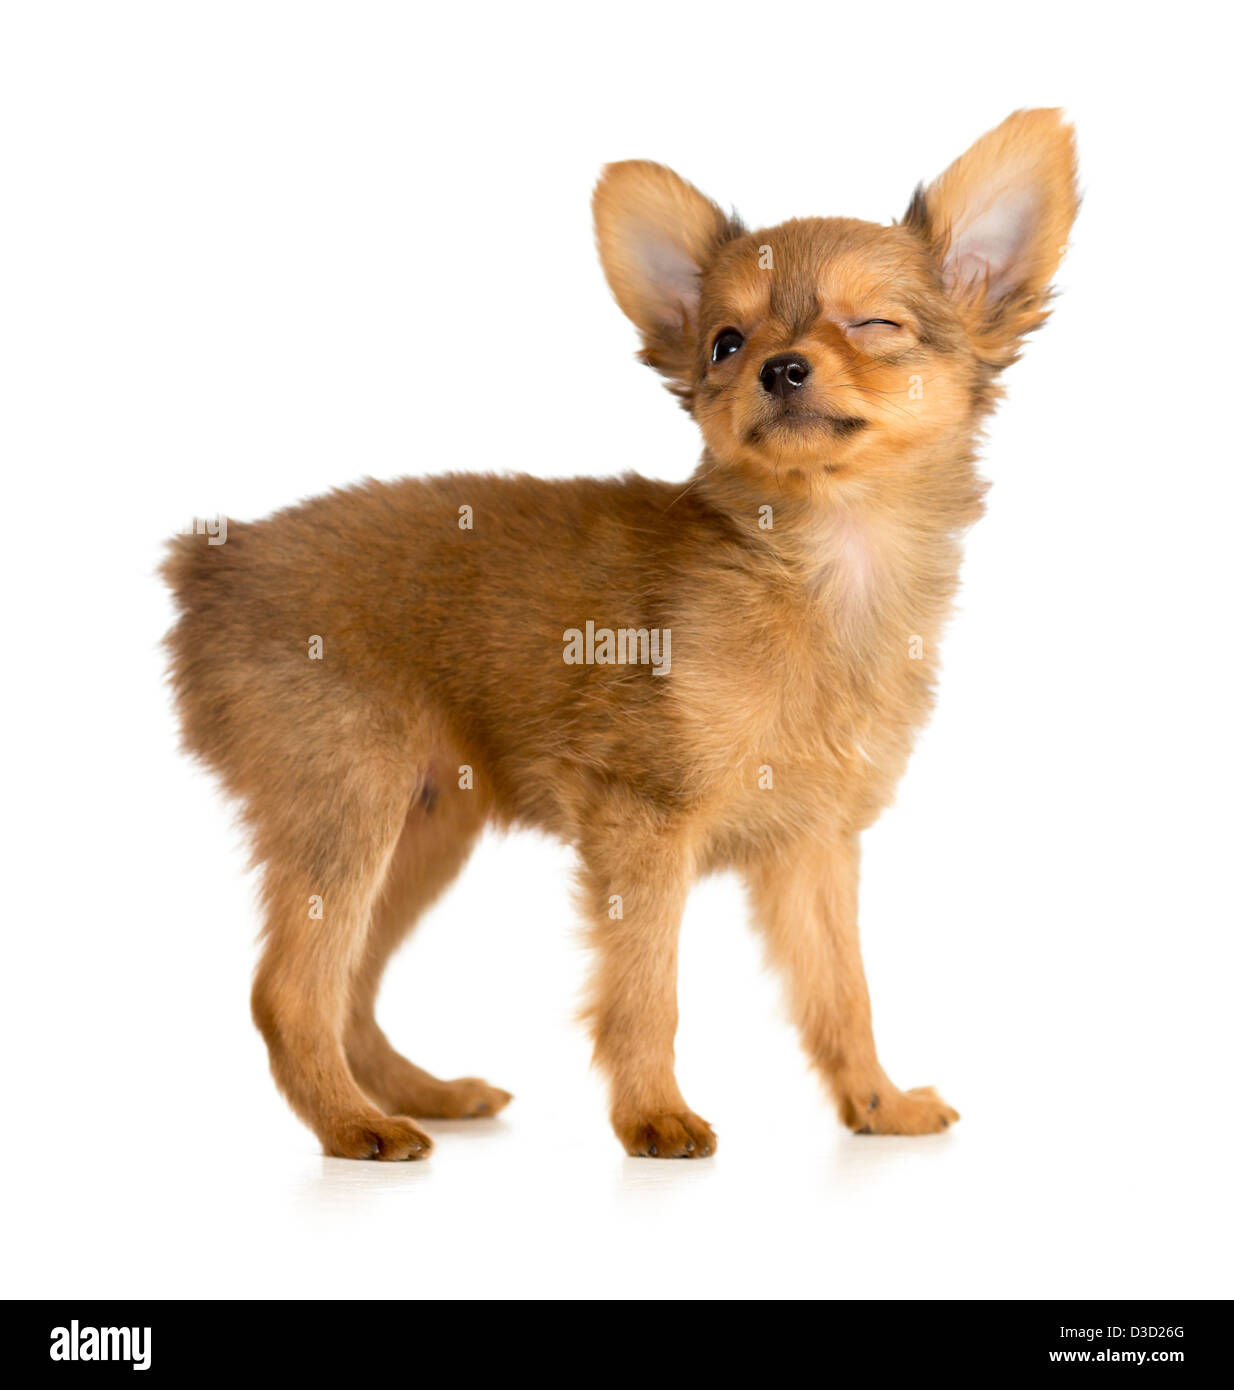 winking Russian toy terrier puppy Stock Photo